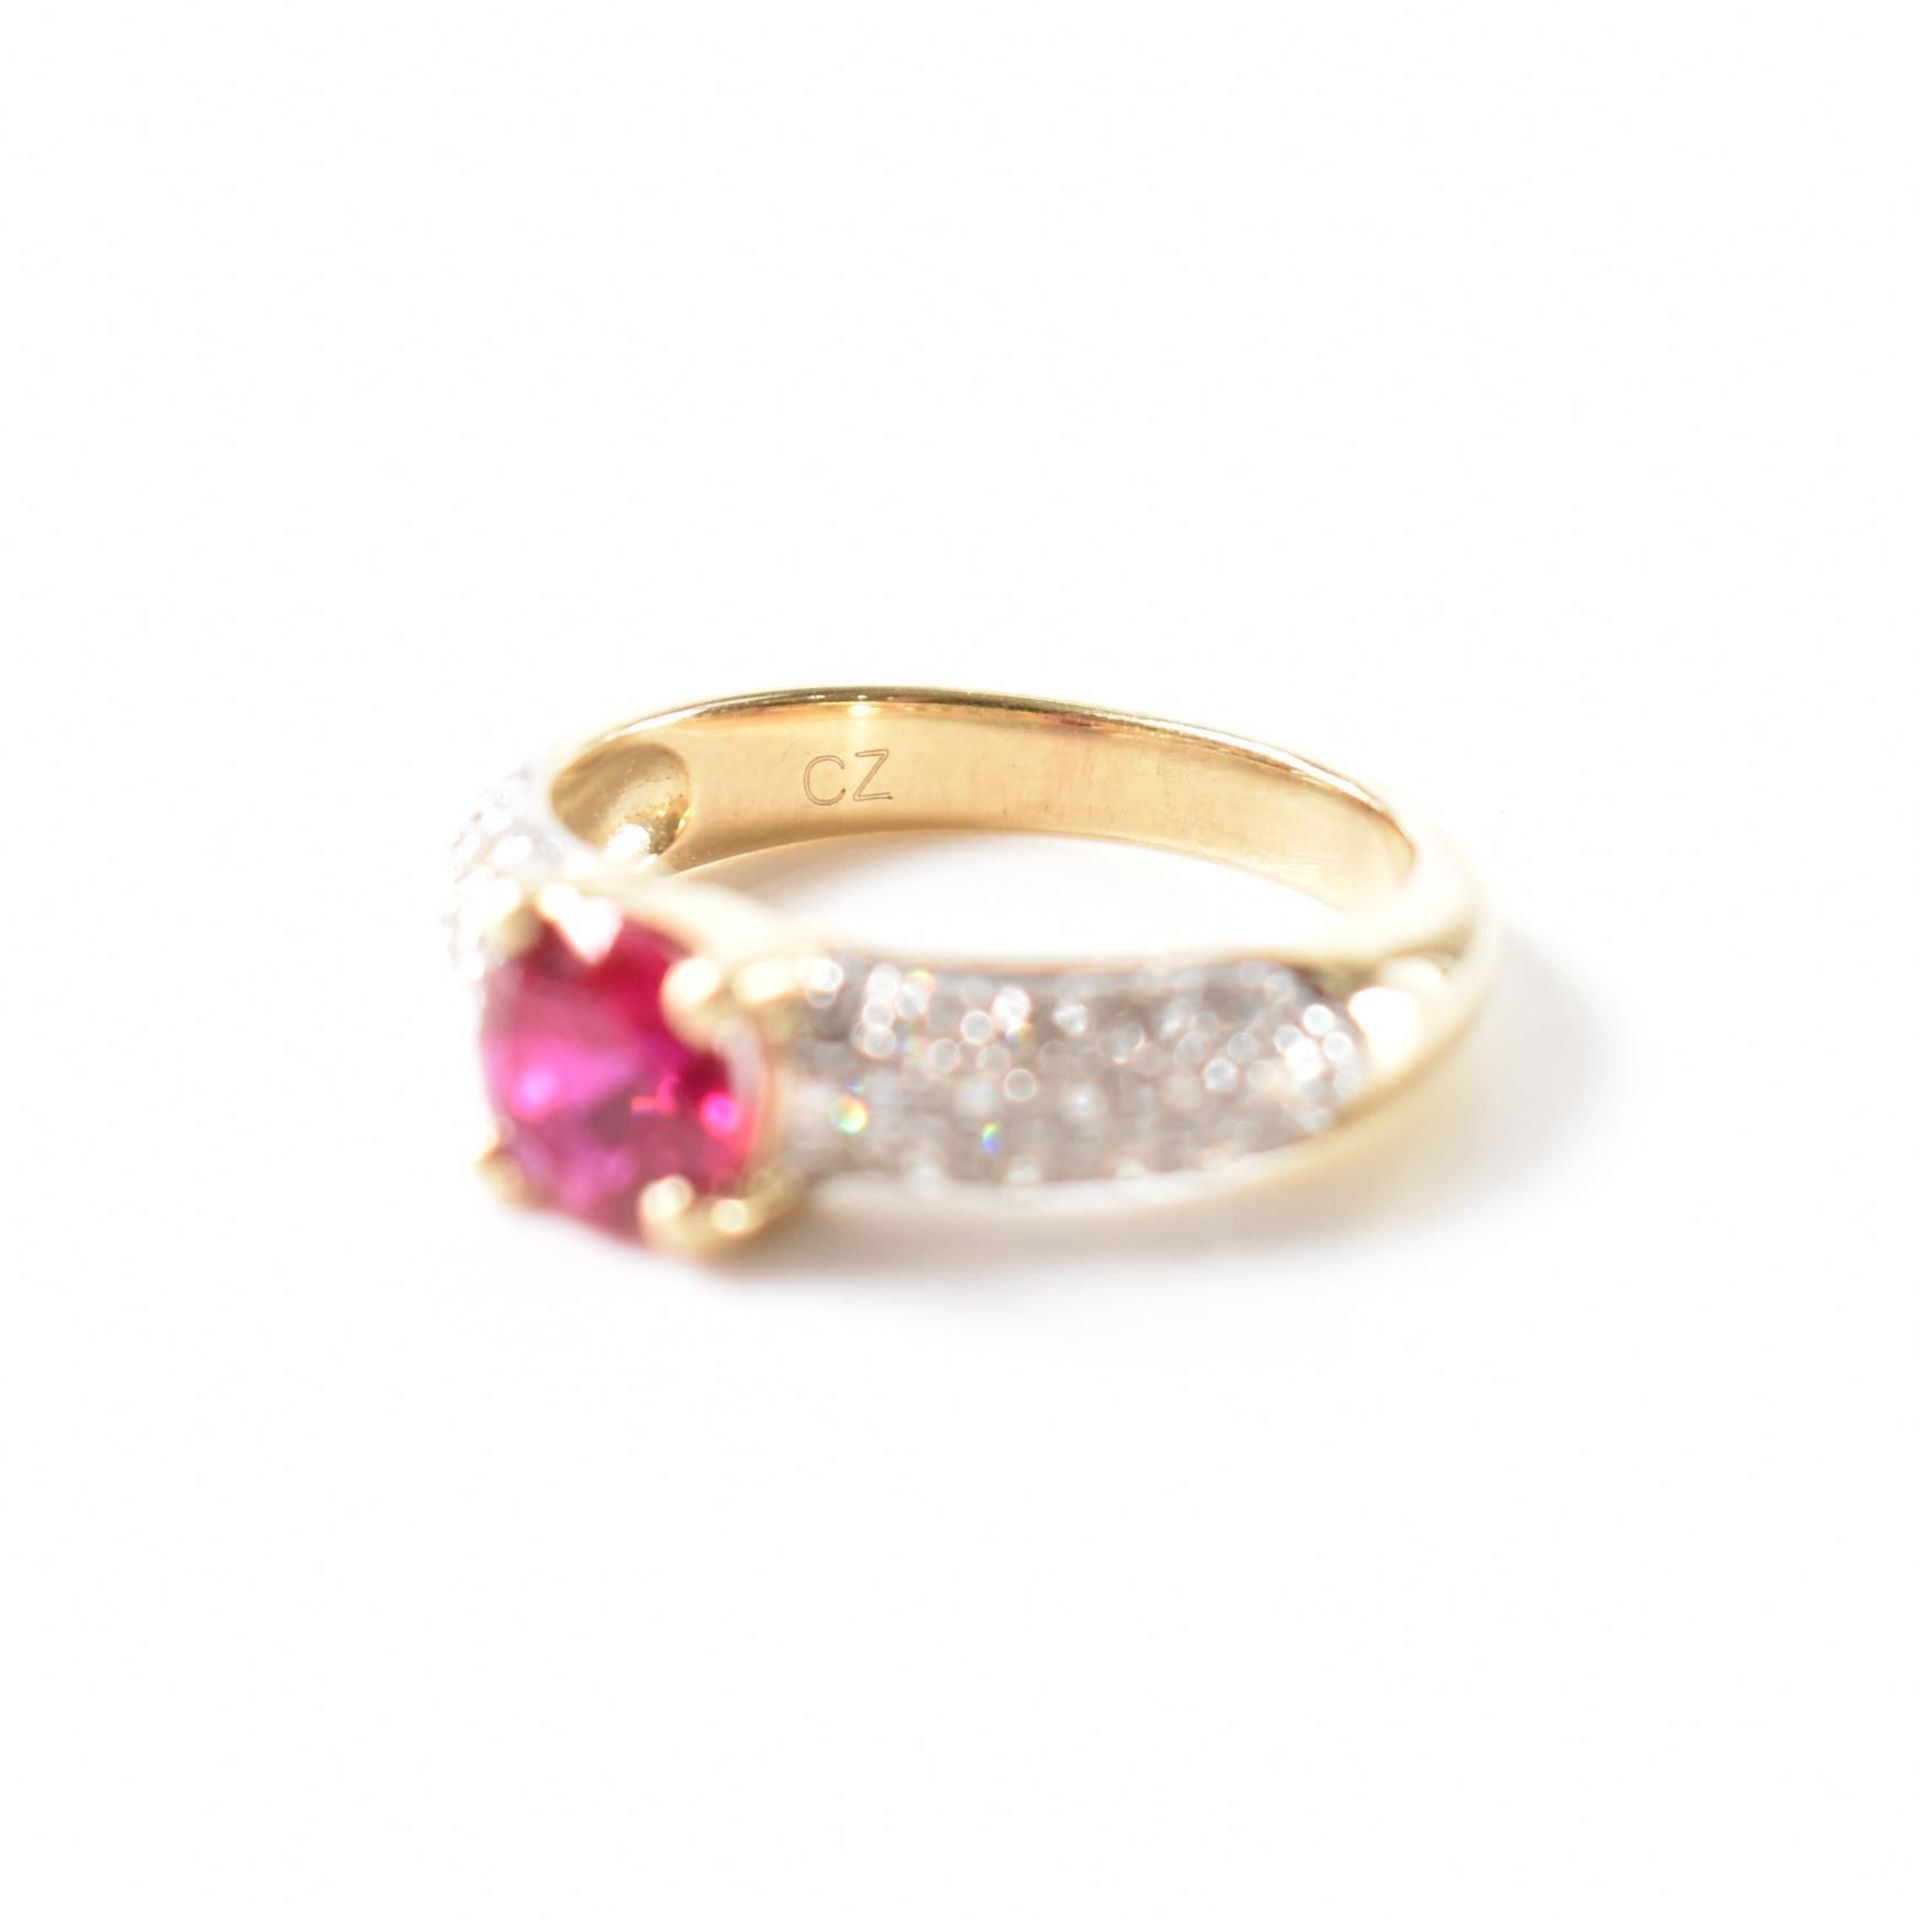 HALLMARKED 9CT GOLD SYNTHETIC RUBY & CZ RING - Image 6 of 7